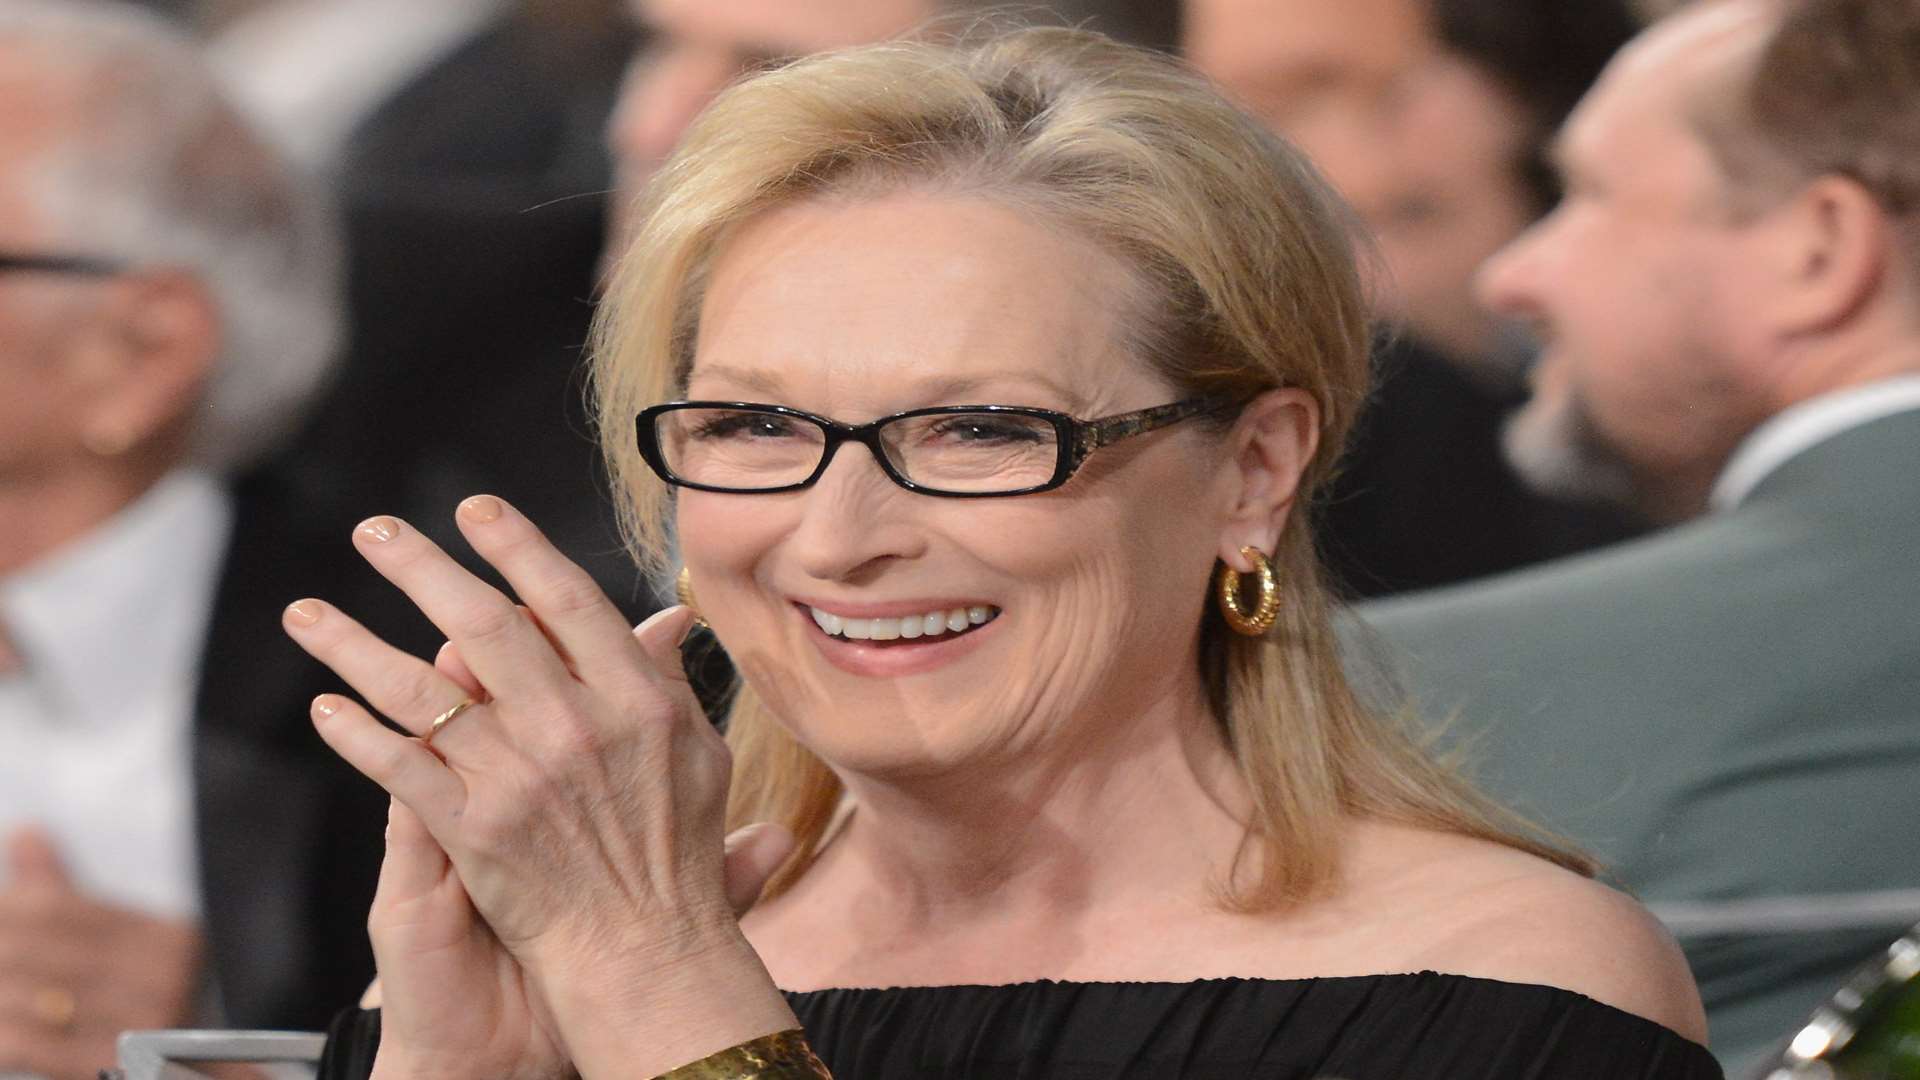 Meryl Streep during 20th Annual Screen Actors Guild Awards at The Shrine Auditorium. Picture courtesy of Ellie Wright